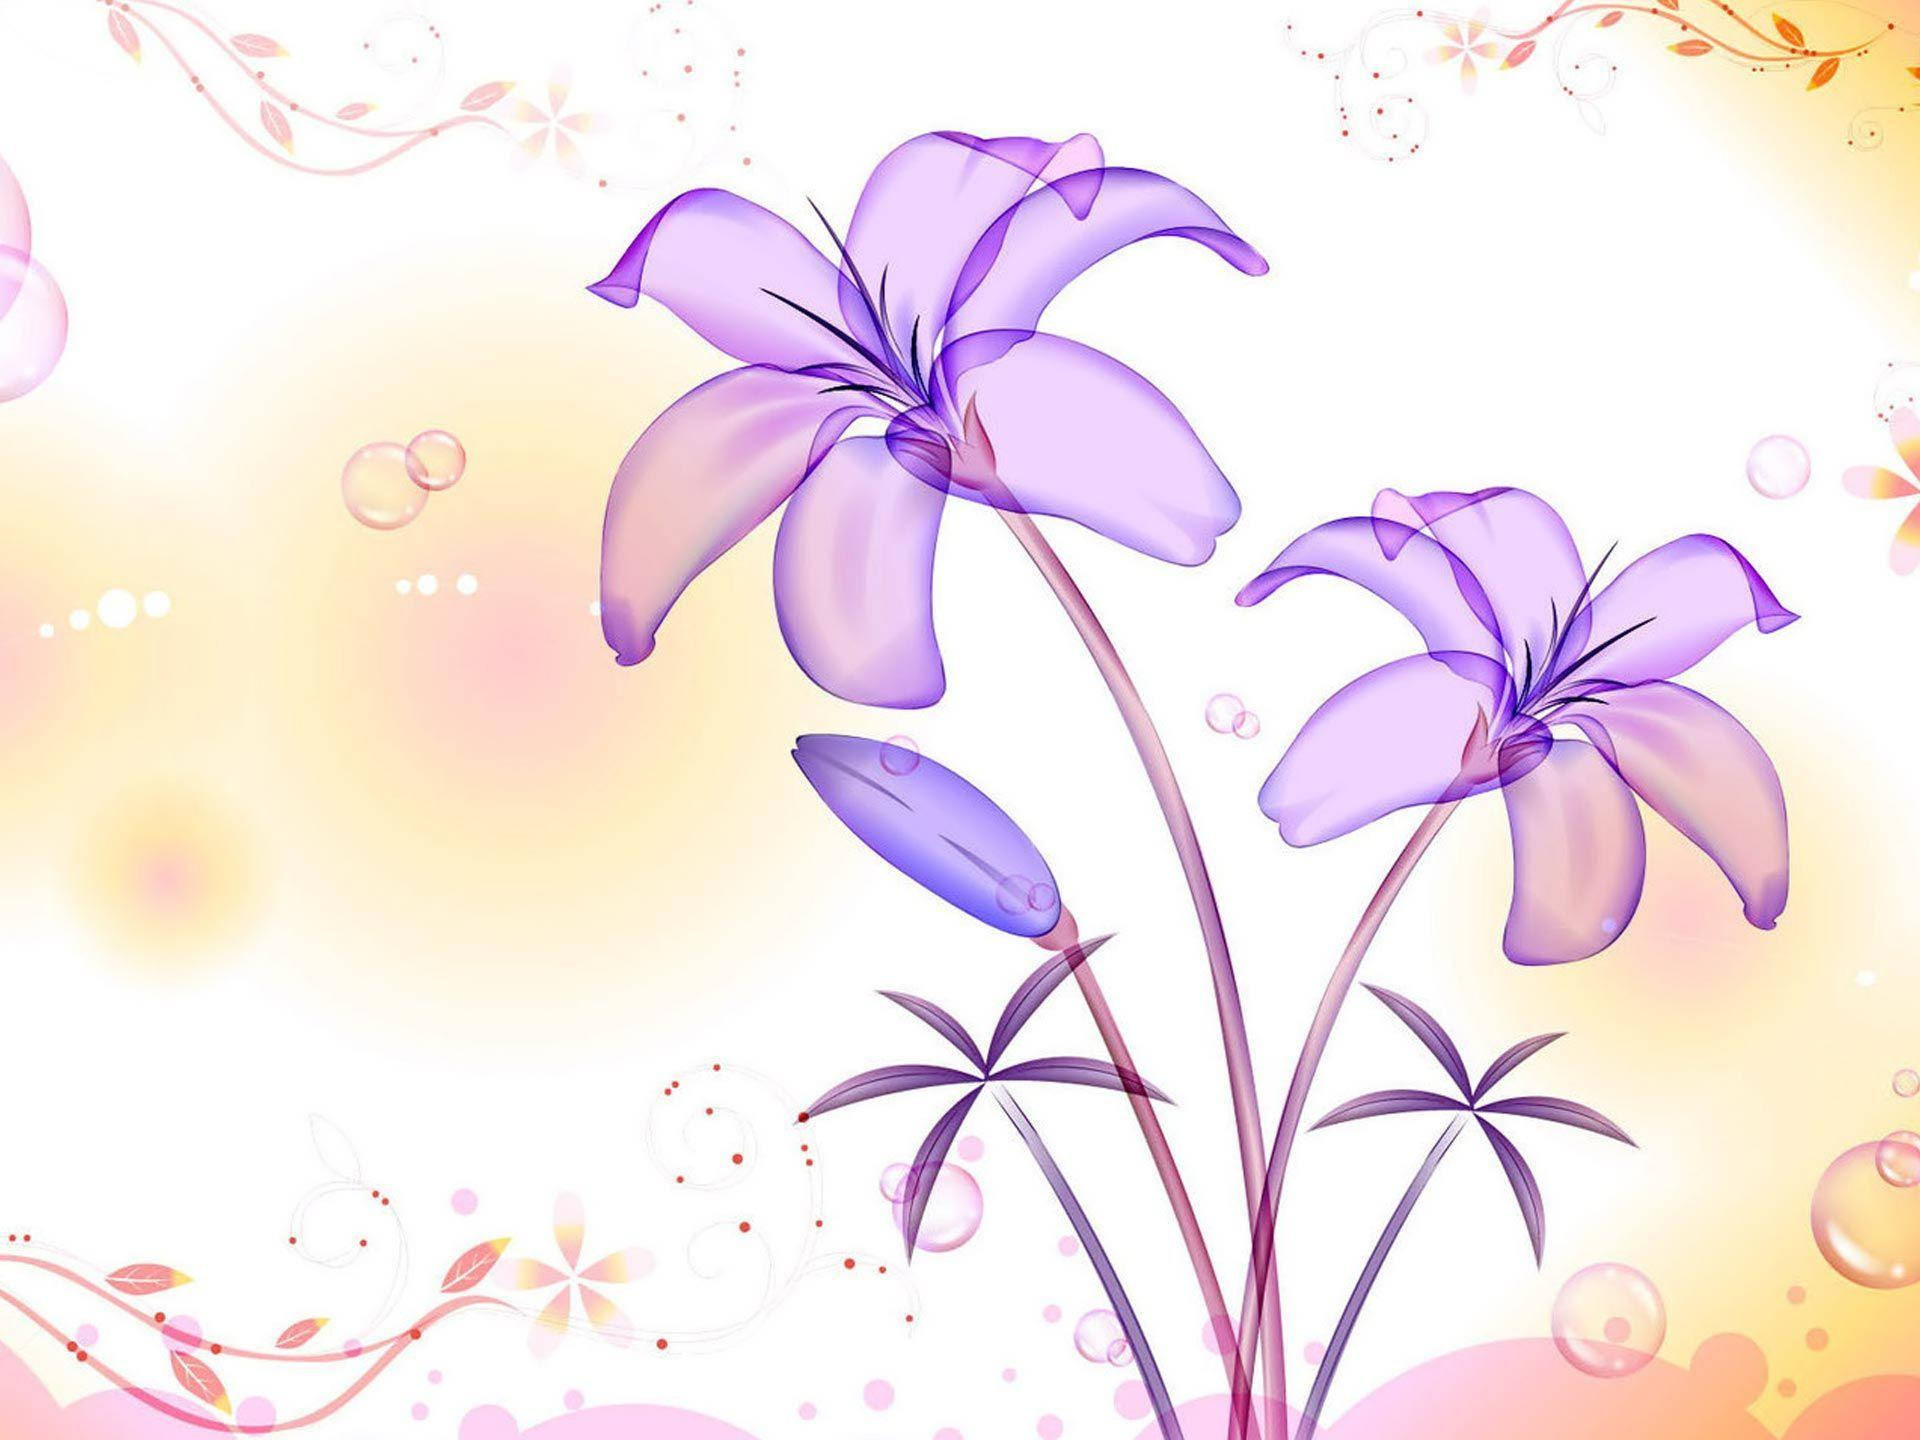 A beautiful laptop featuring a purple flower design, ready to assist in any task. Wallpaper